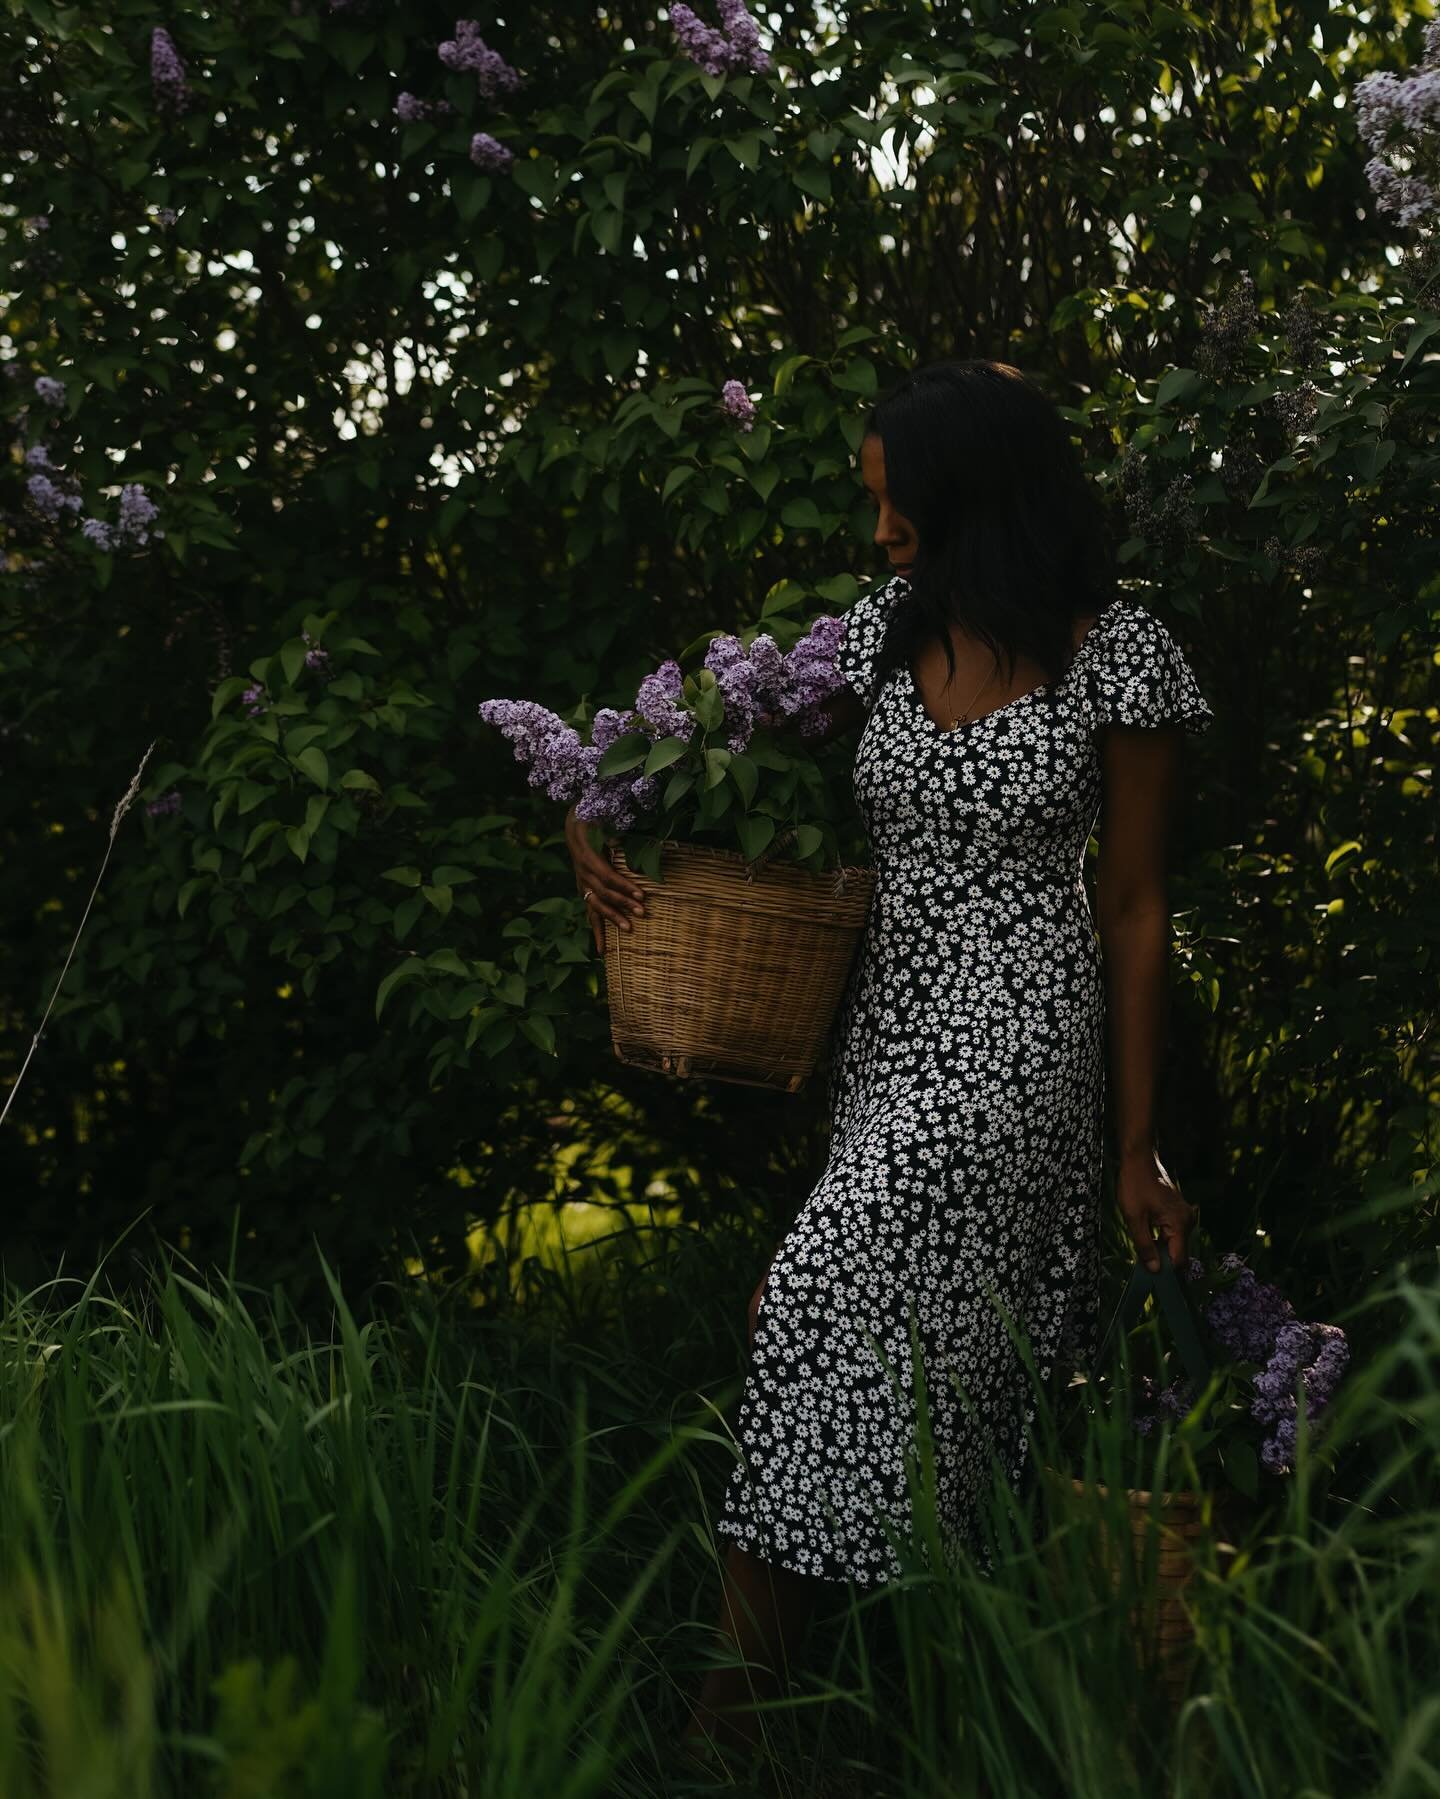 hello, i&rsquo;m alyson, and i&rsquo;m completely besotted with spring flowers. dashed out to gather lilacs before the rain, i feared i might be too late. the essence of lilacs help us &ldquo;confront painful memories and trauma, but allow us to hold